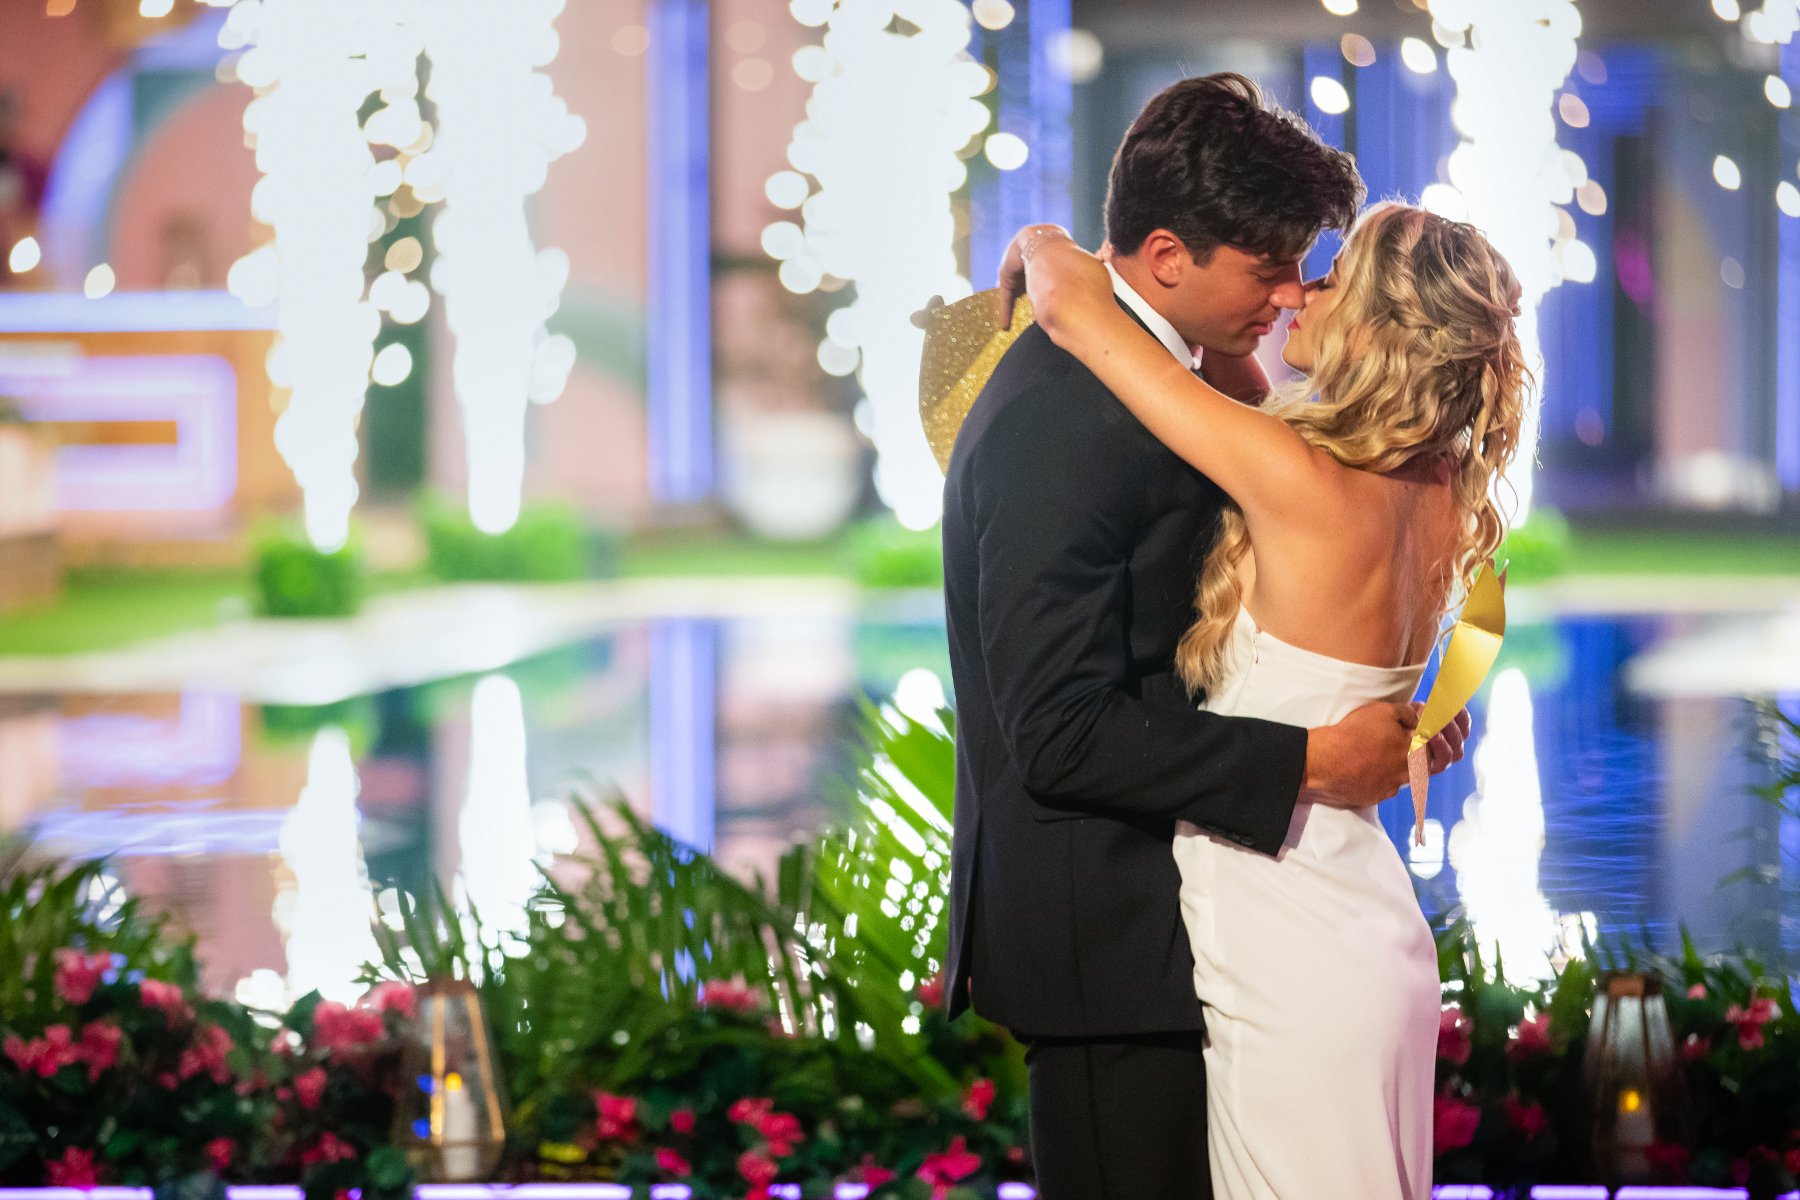 Zac Mirabelli and Elizabeth Weber for our article about who wins 'Love Island USA' Season 1. She's wearing a white wedding dress, and he's wearing a black suit. They're about to kiss.